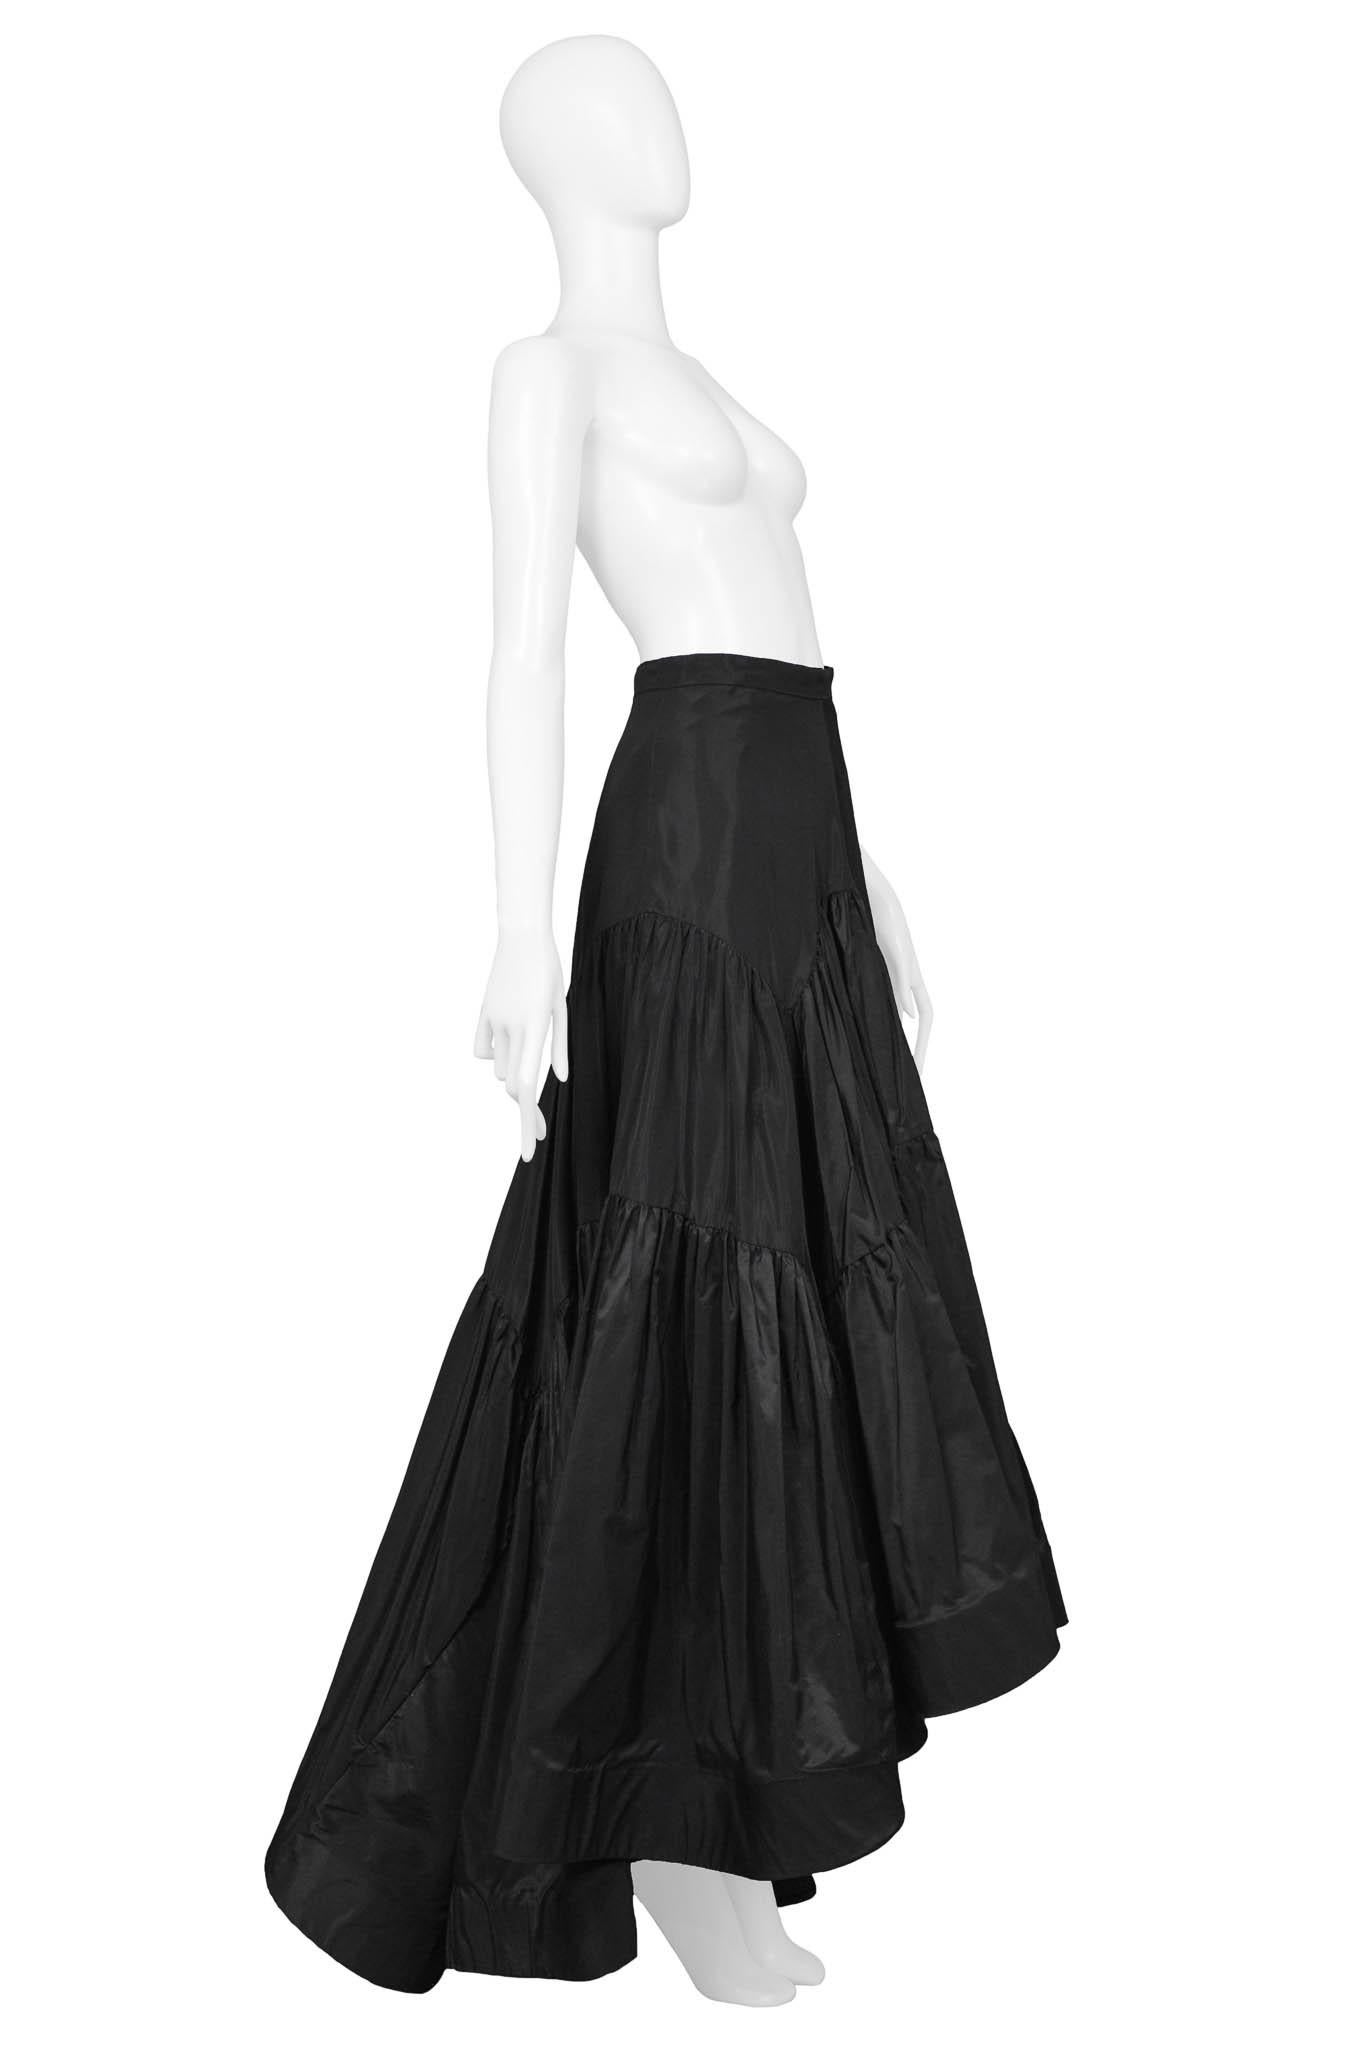 Katy Rodriguez Black Ball Gown Skirt In Excellent Condition For Sale In Los Angeles, CA